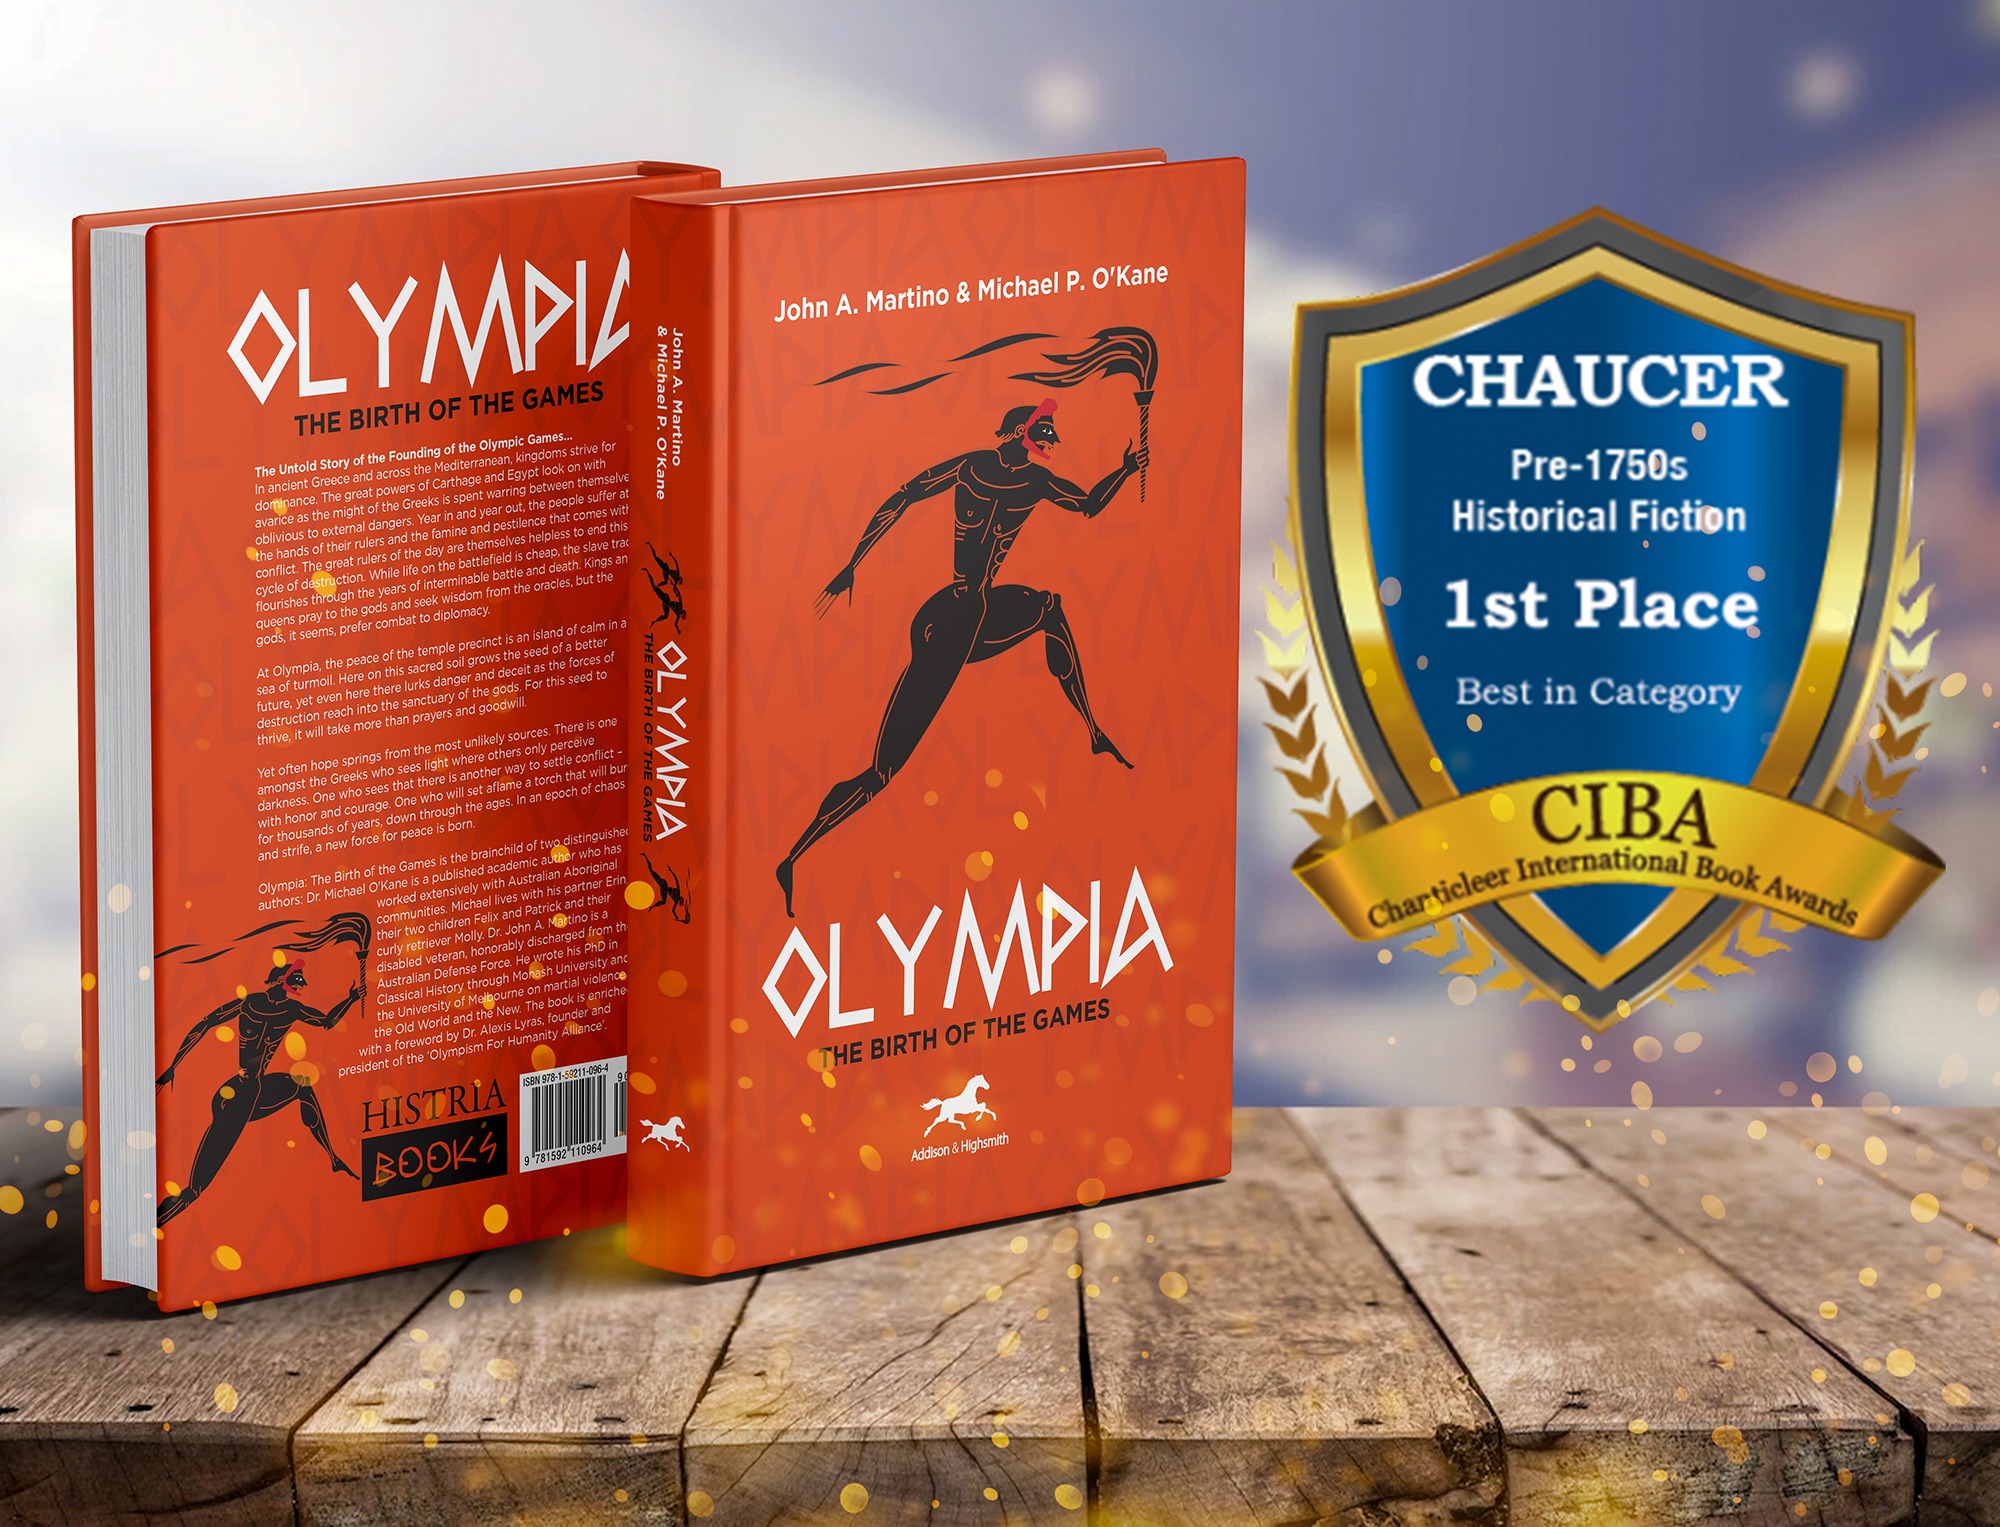 “OLYMPIA: THE BIRTH OF THE GAMES” WINS 1ST PLACE IN THE CHANTICLEER INTERNATIONAL BOOK AWARDS